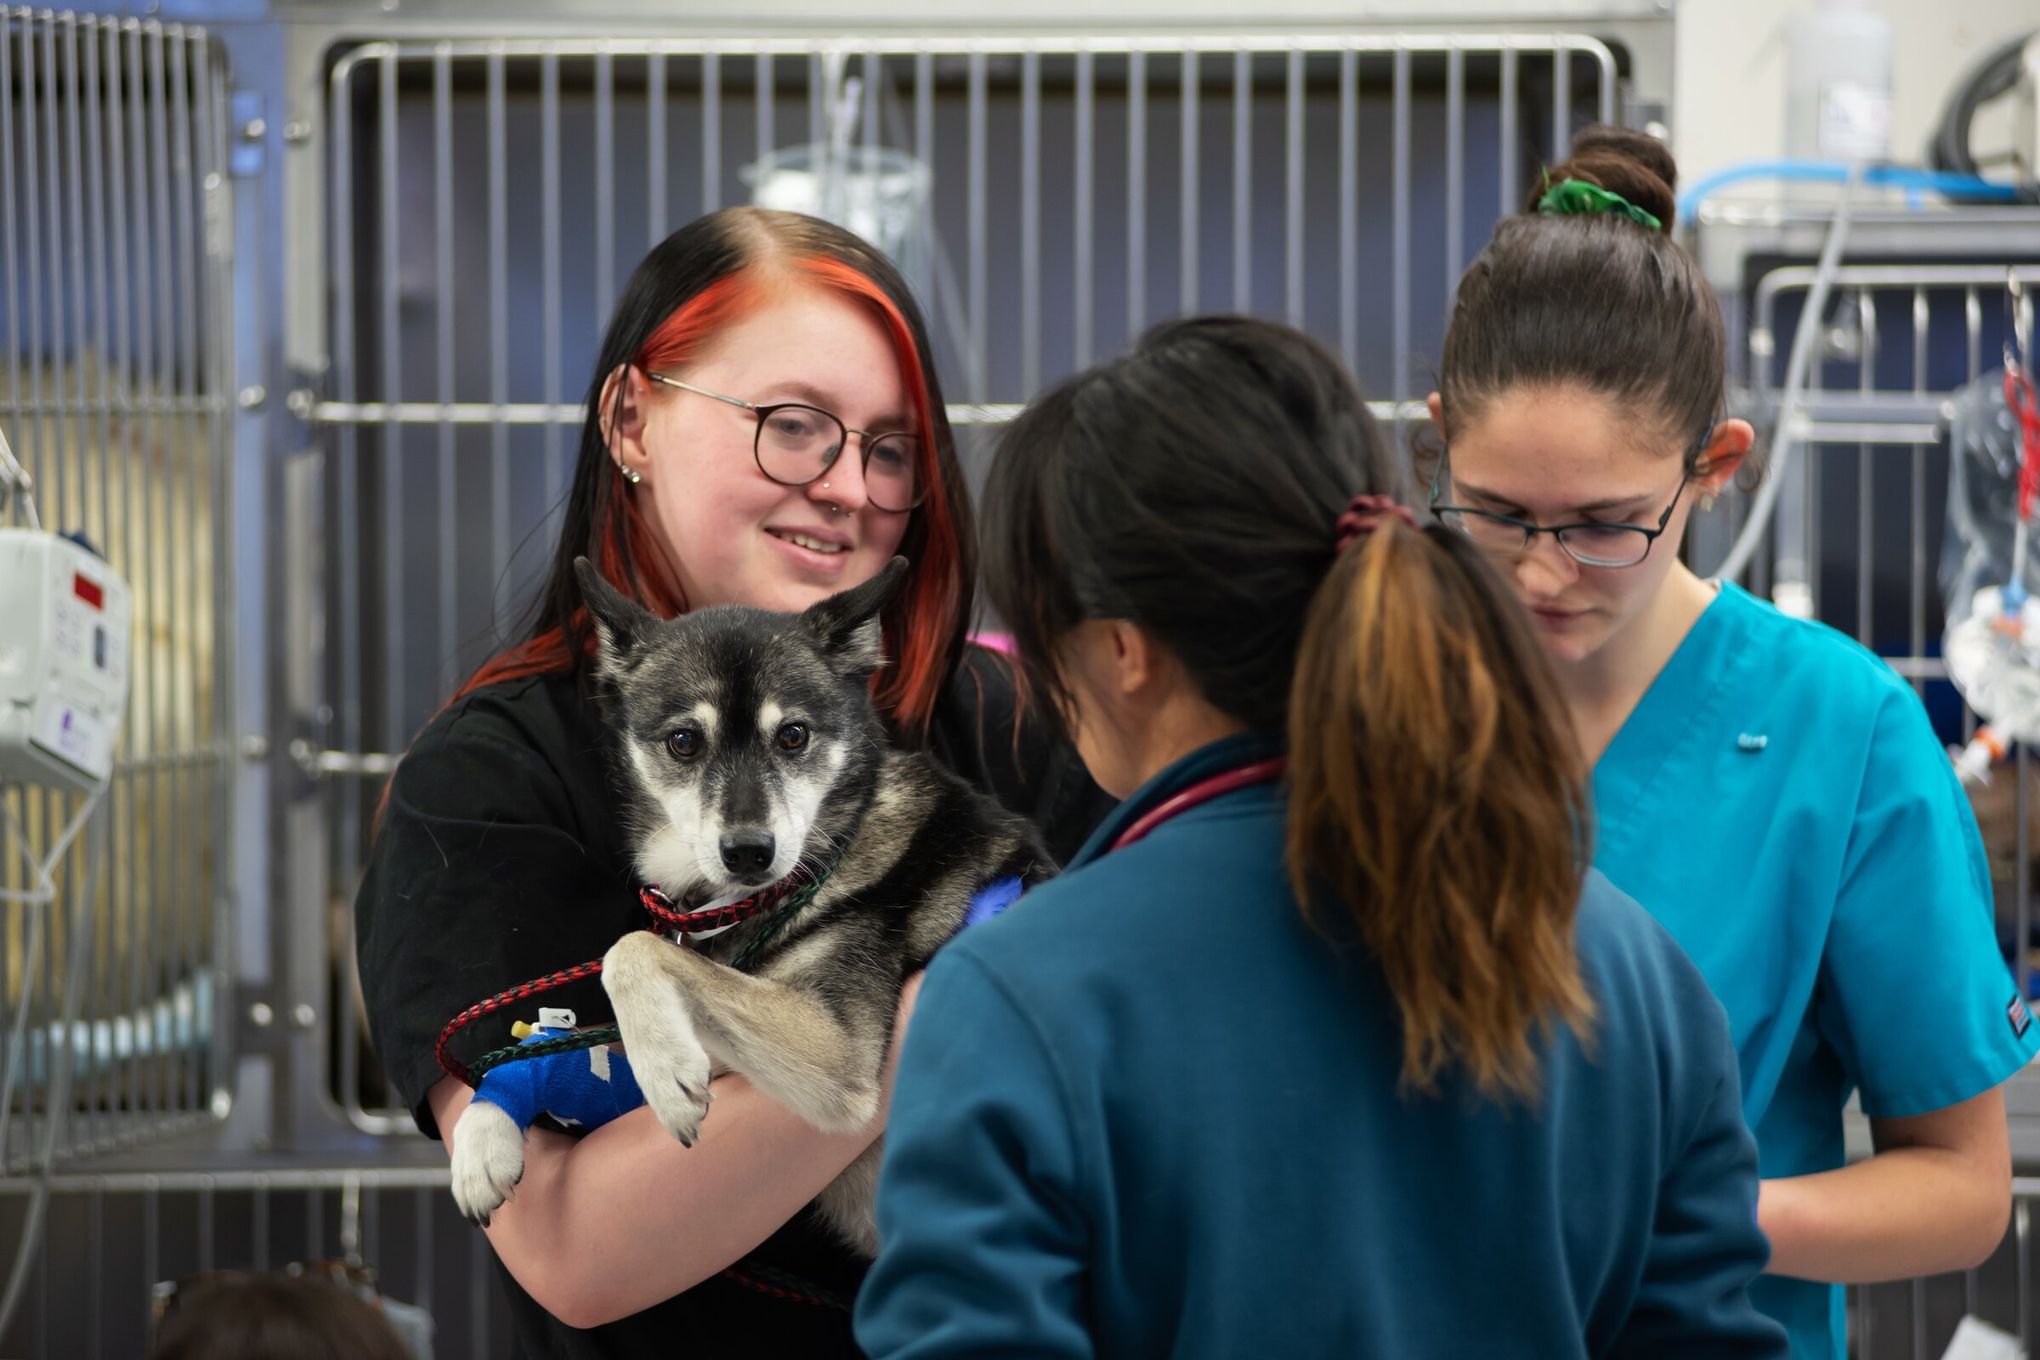 Between 4,000 and 5,000 small-animal emergency patients are seen annually at the WSU veterinary hospital. Such care is provided 24 hours a day, 365 days a year, with no appointment necessary. Mikayla... (Ted S.